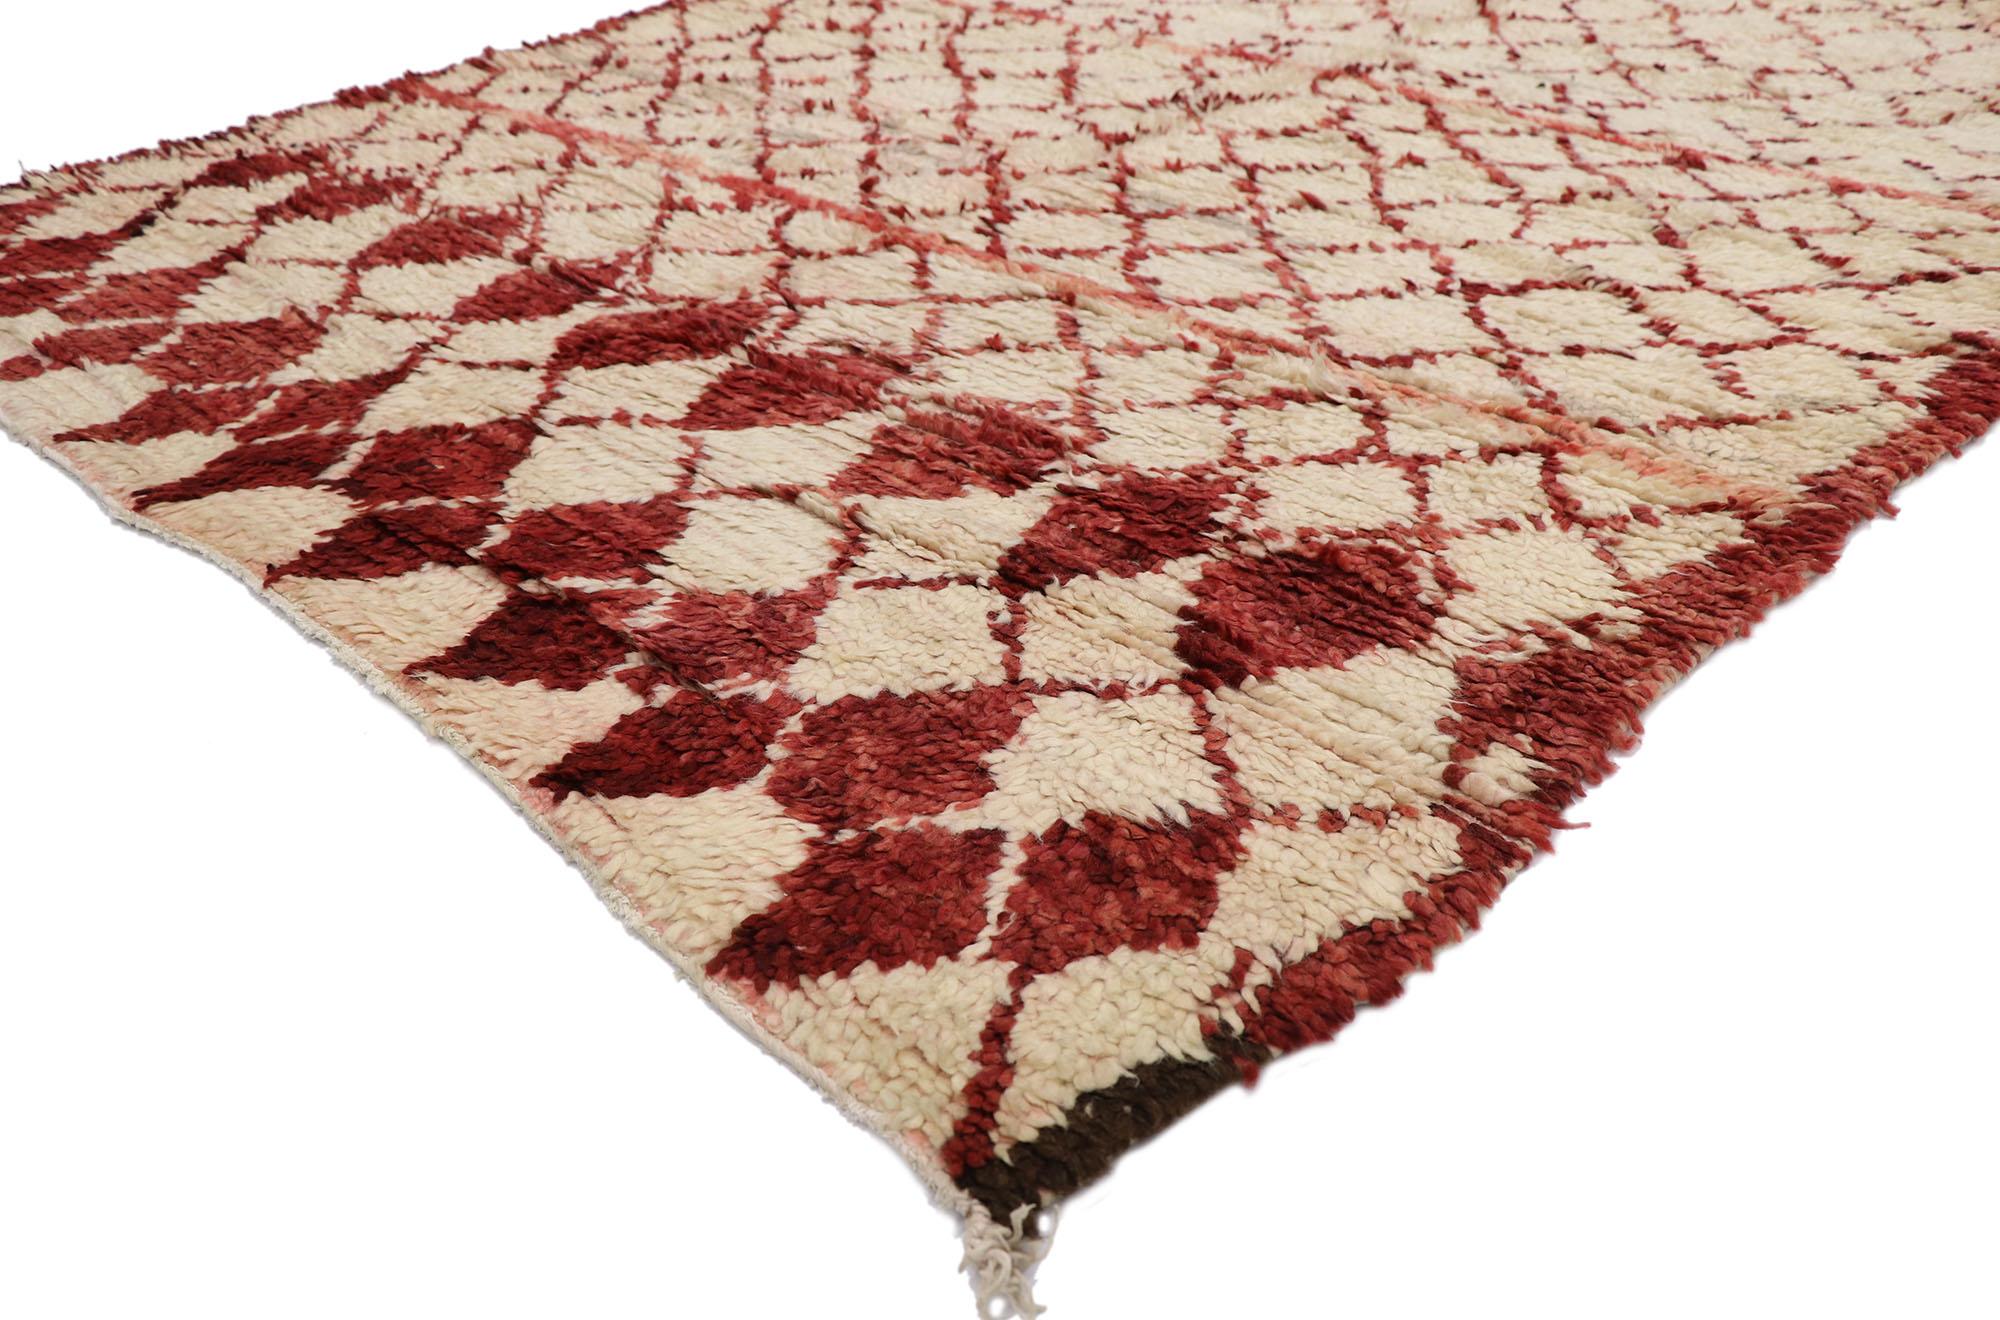 21458 Vintage Moroccan Azilal rug, 05'10 x 07'07.
Emanating nomadic charm with incredible detail and texture, this hand knotted wool vintage Azilal Moroccan rug is a captivating vision of woven beauty. The eye-catching diamond trellis and lively